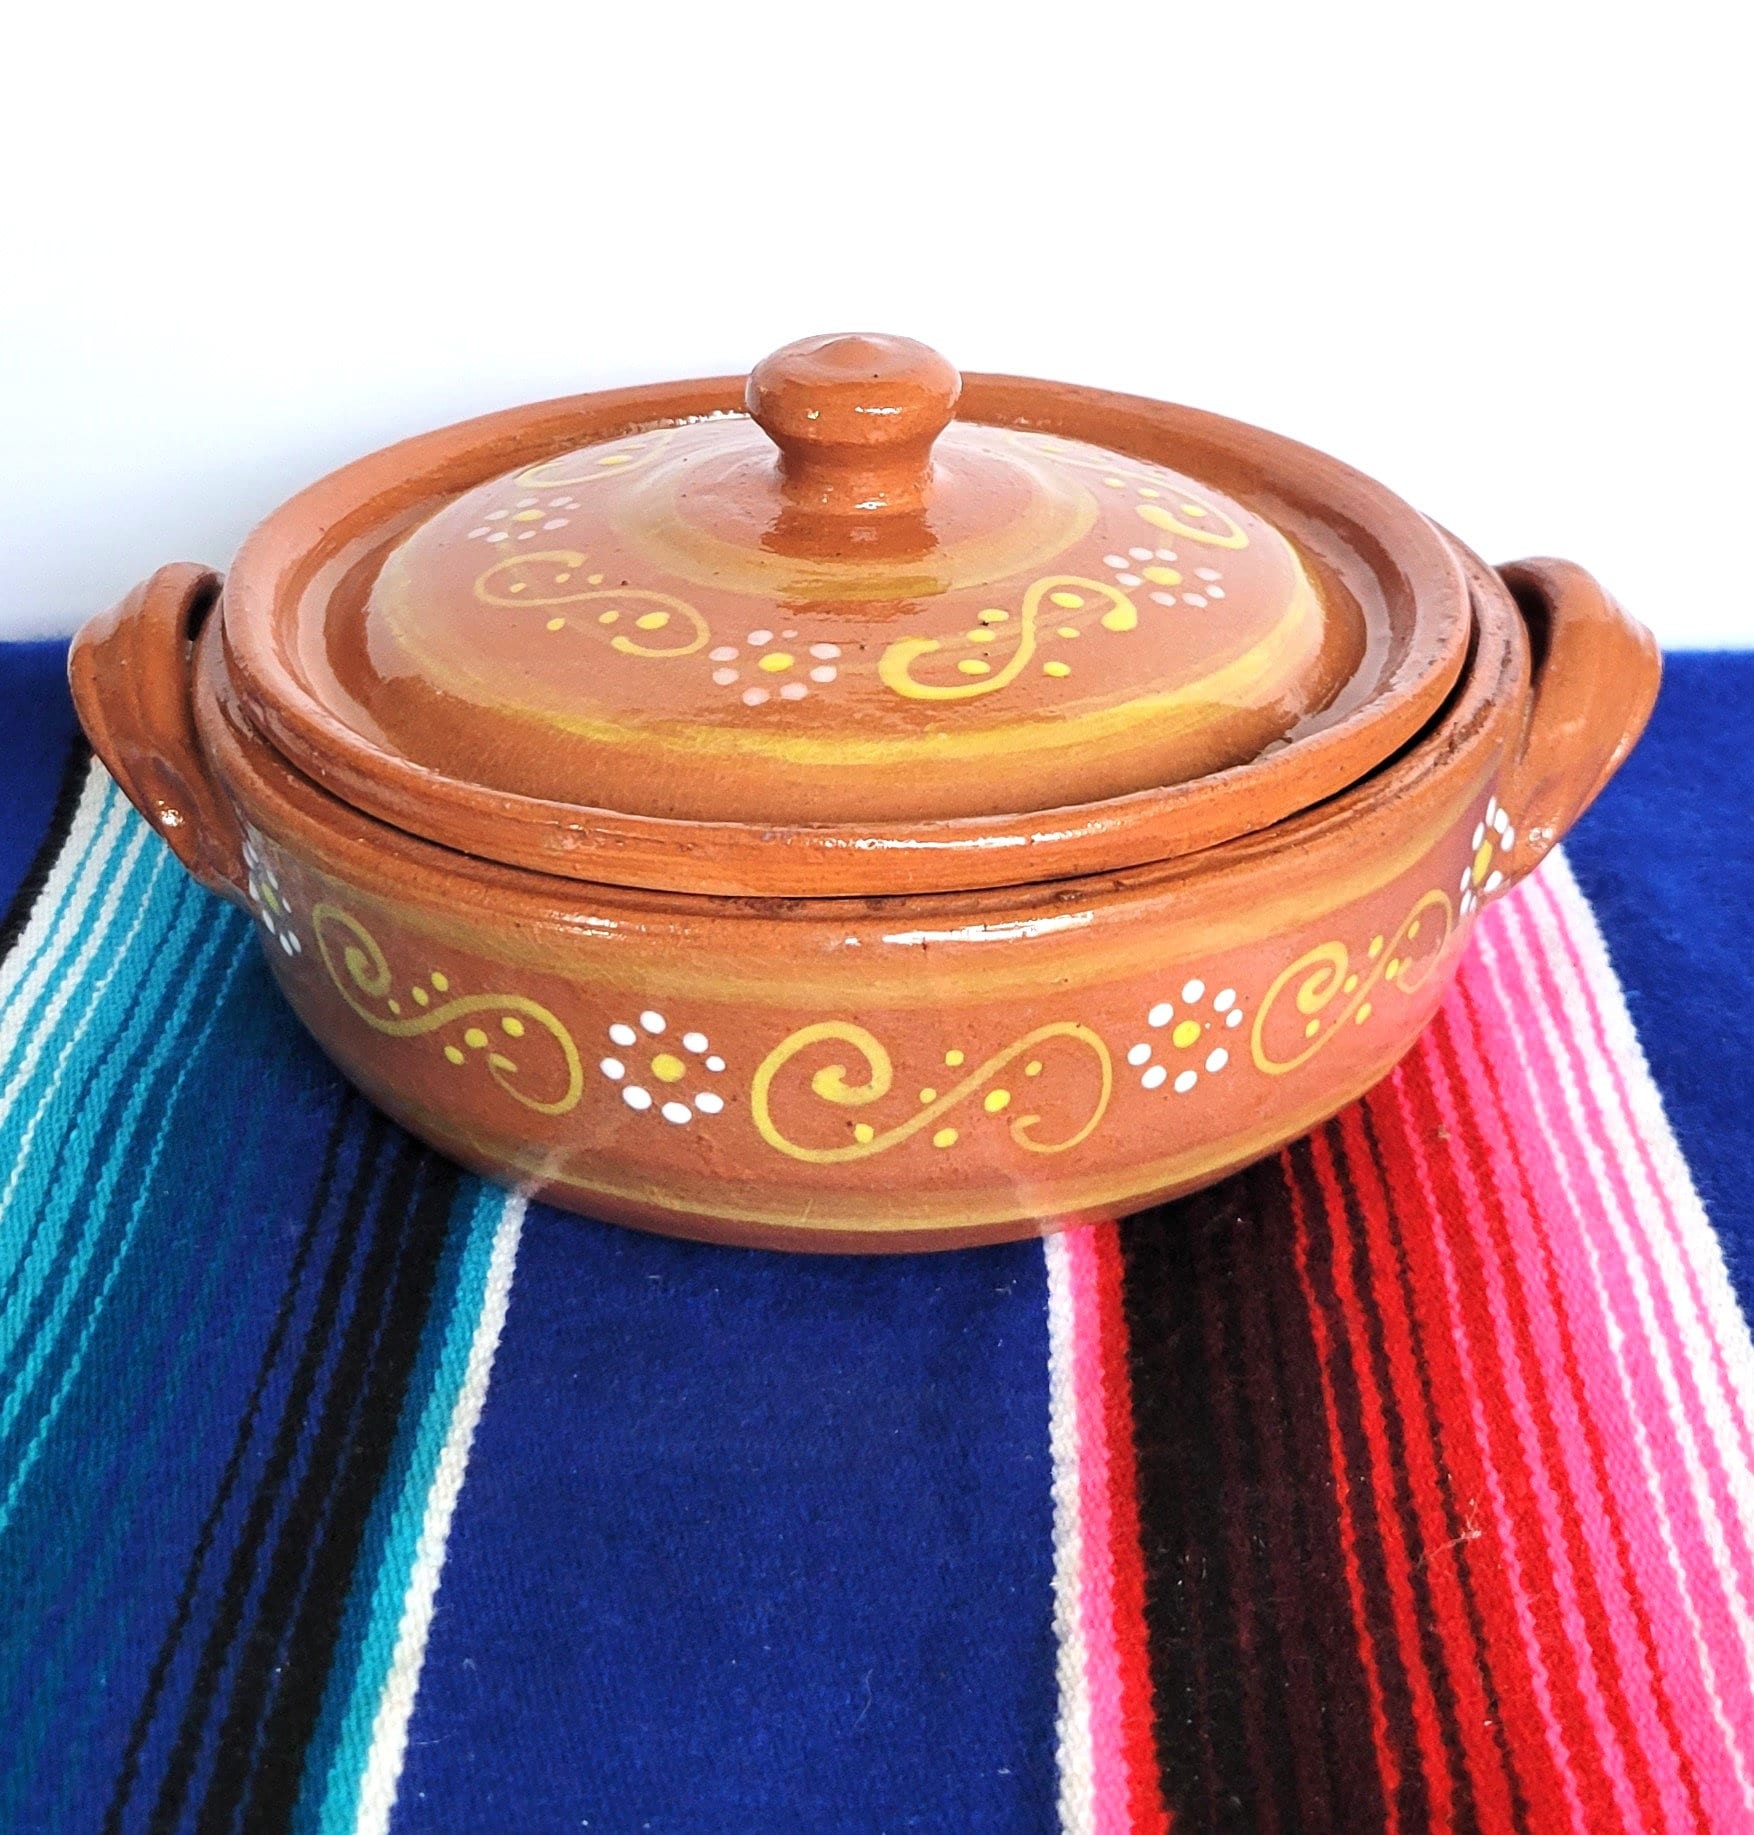  Comal for Tortillas Terracotta 10 Inches (25 CMS